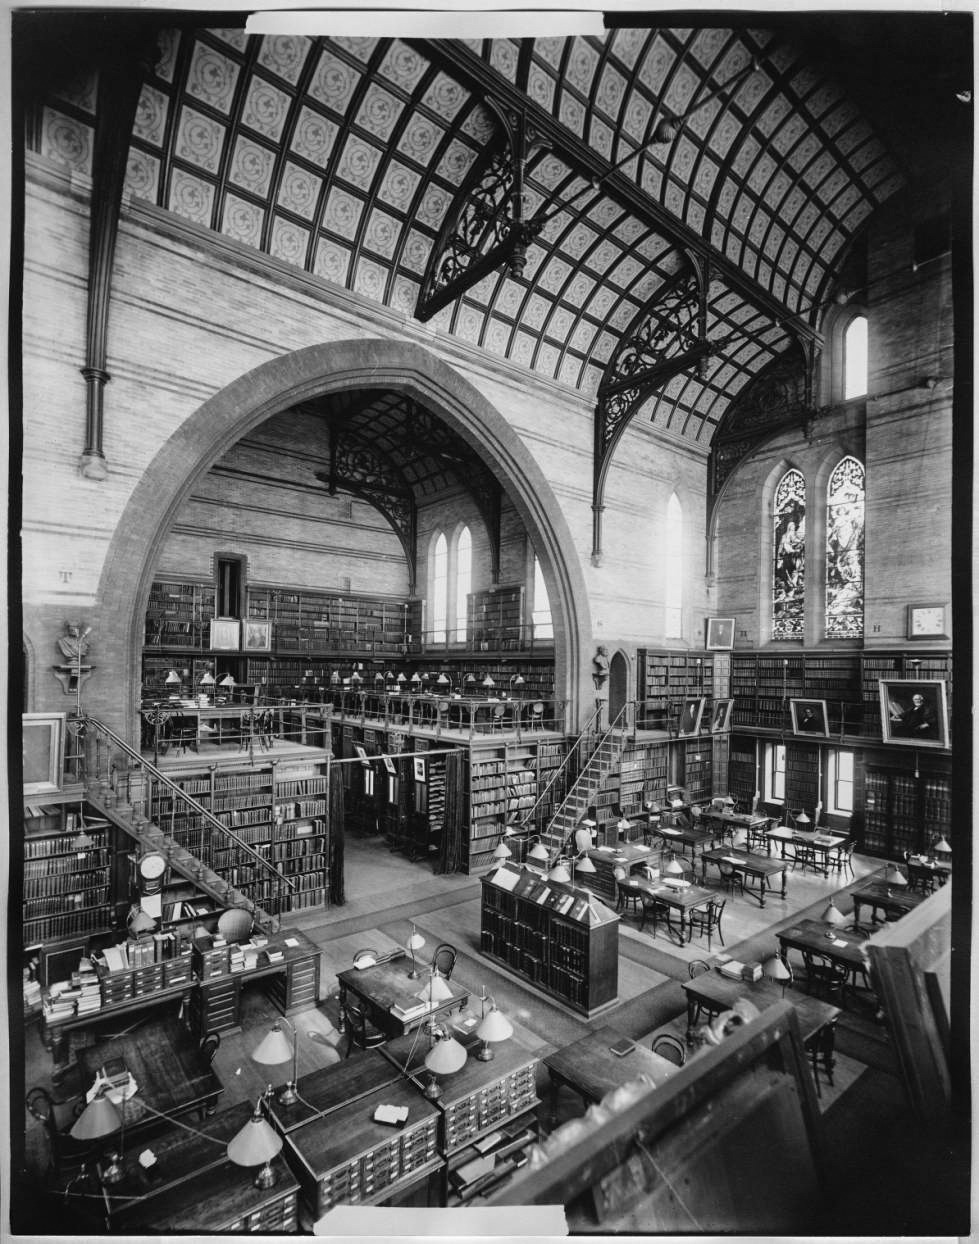 archimaps:
“ Inside the library of Columbia College on 49th Street at Madison Avenue, New York City
”